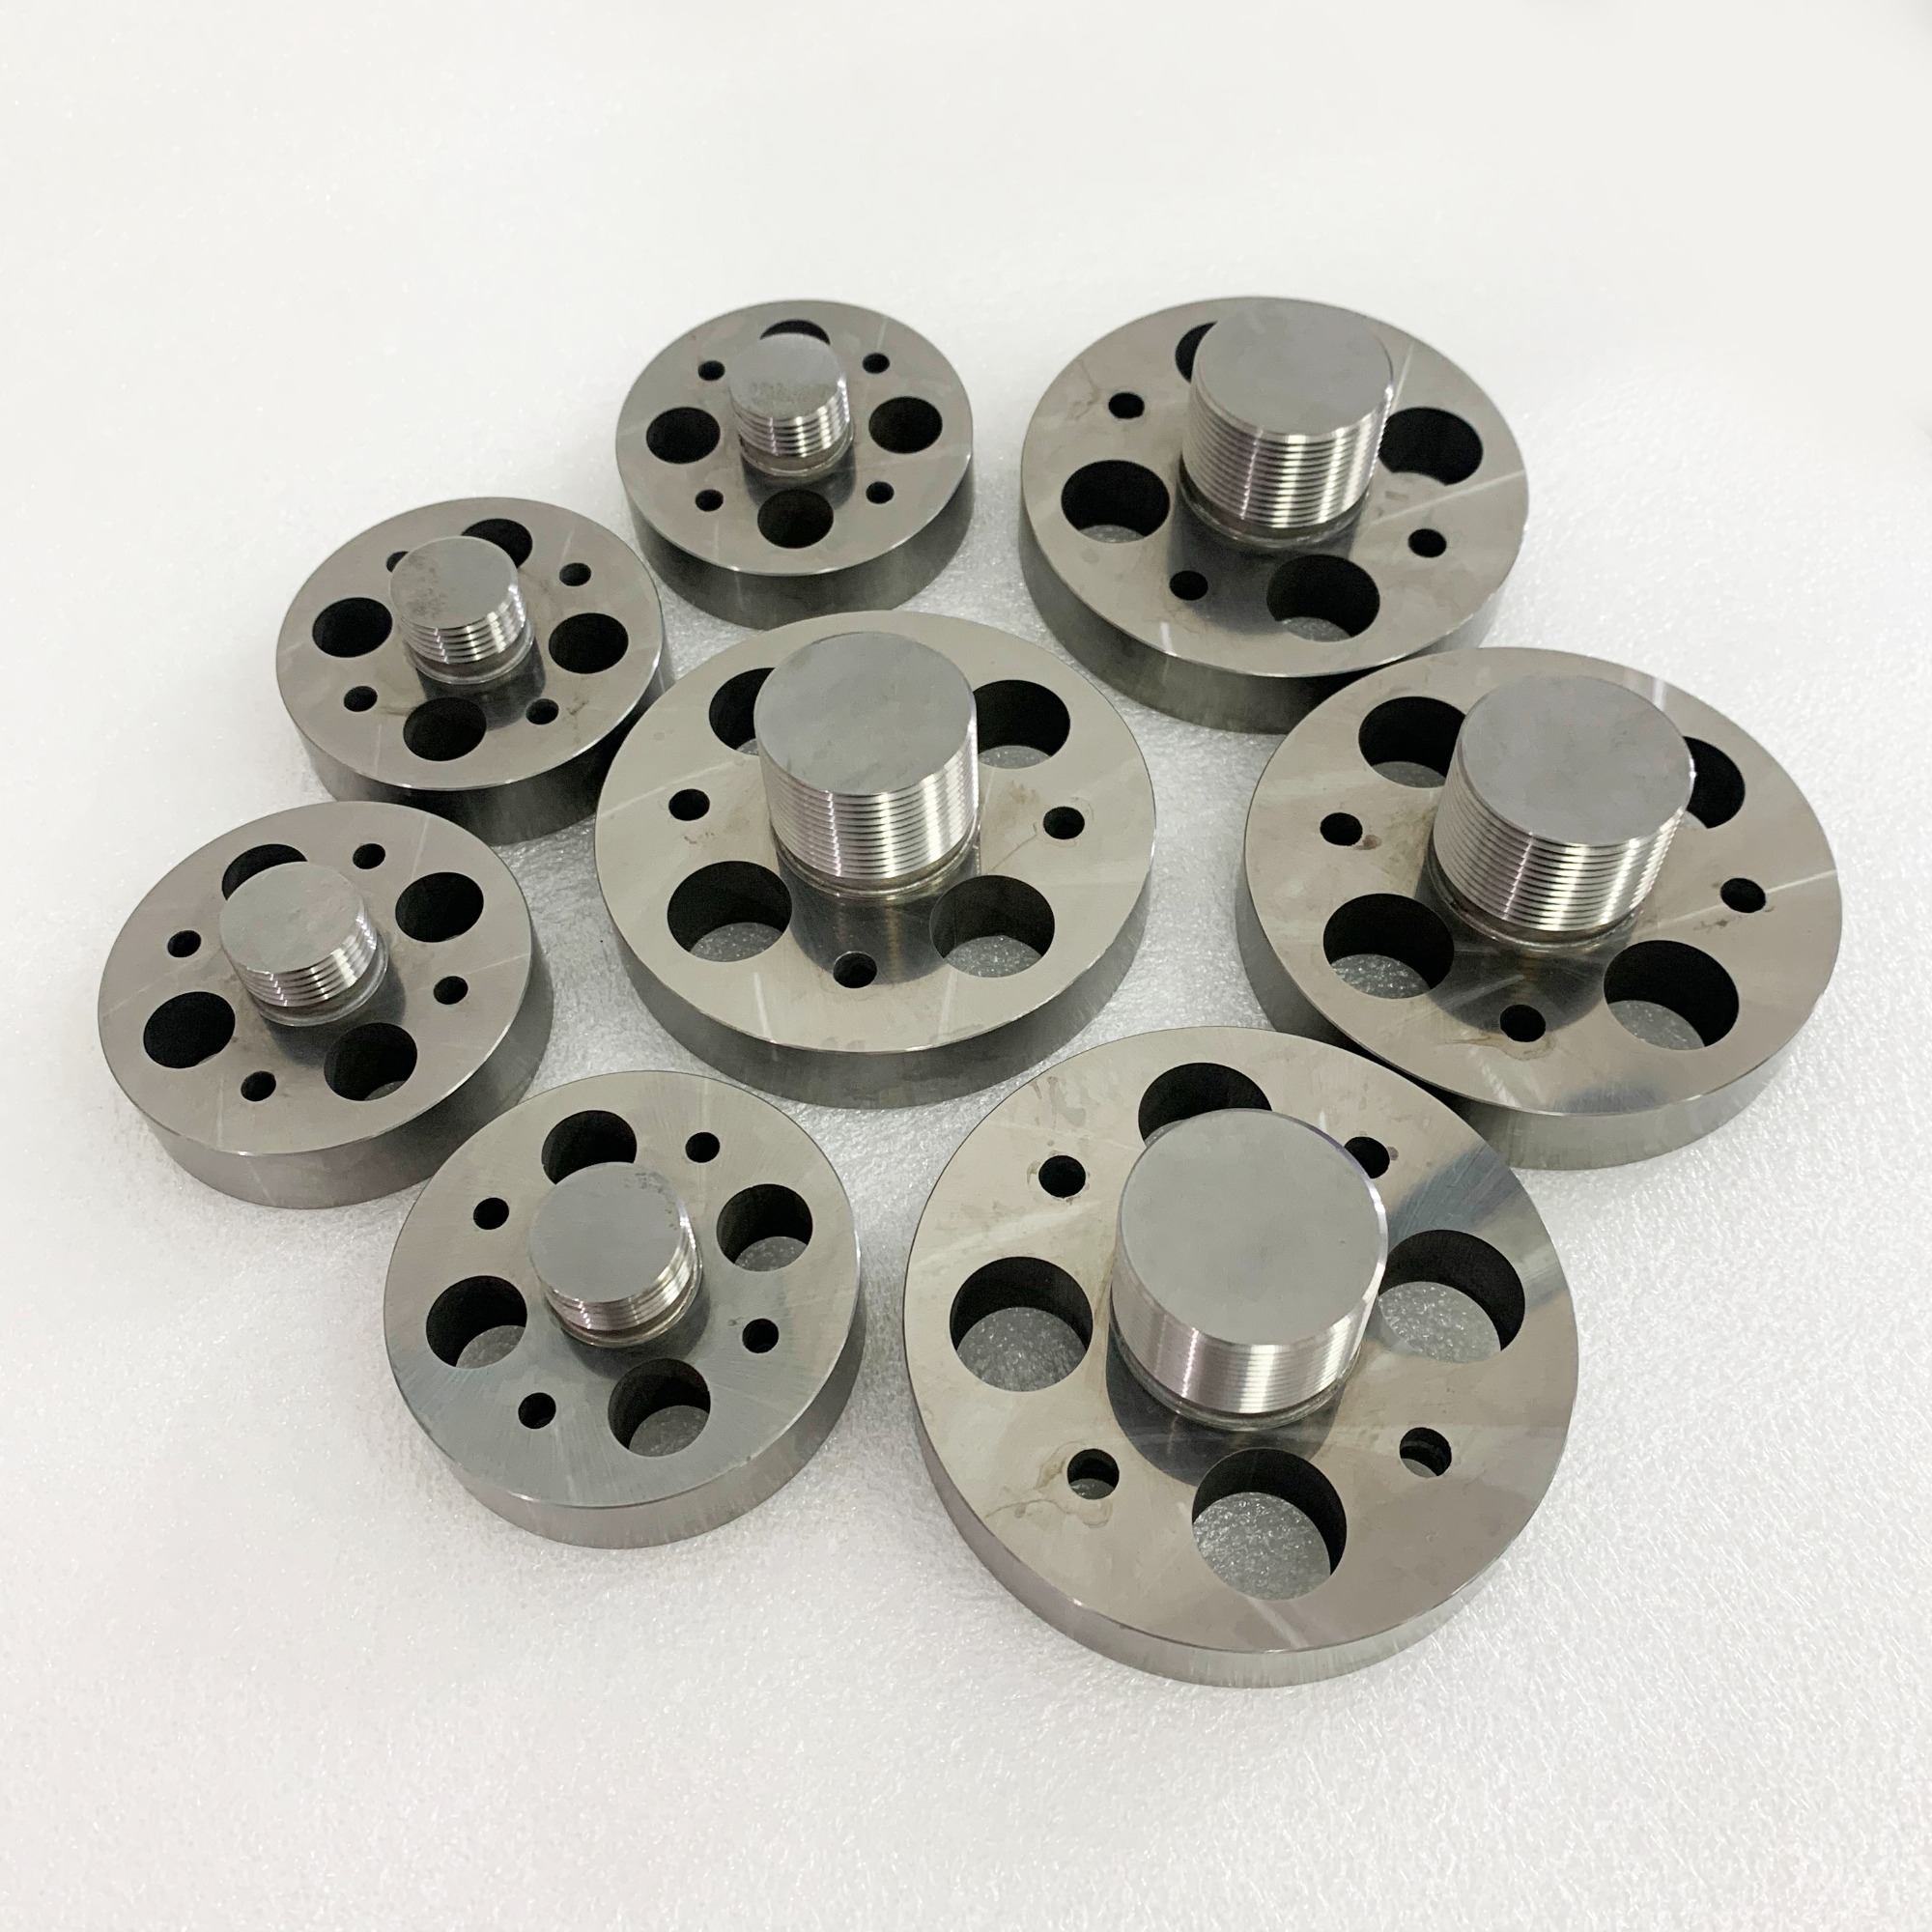 Tungsten Carbide Valve Plug and Seats Blanks for Flow Control